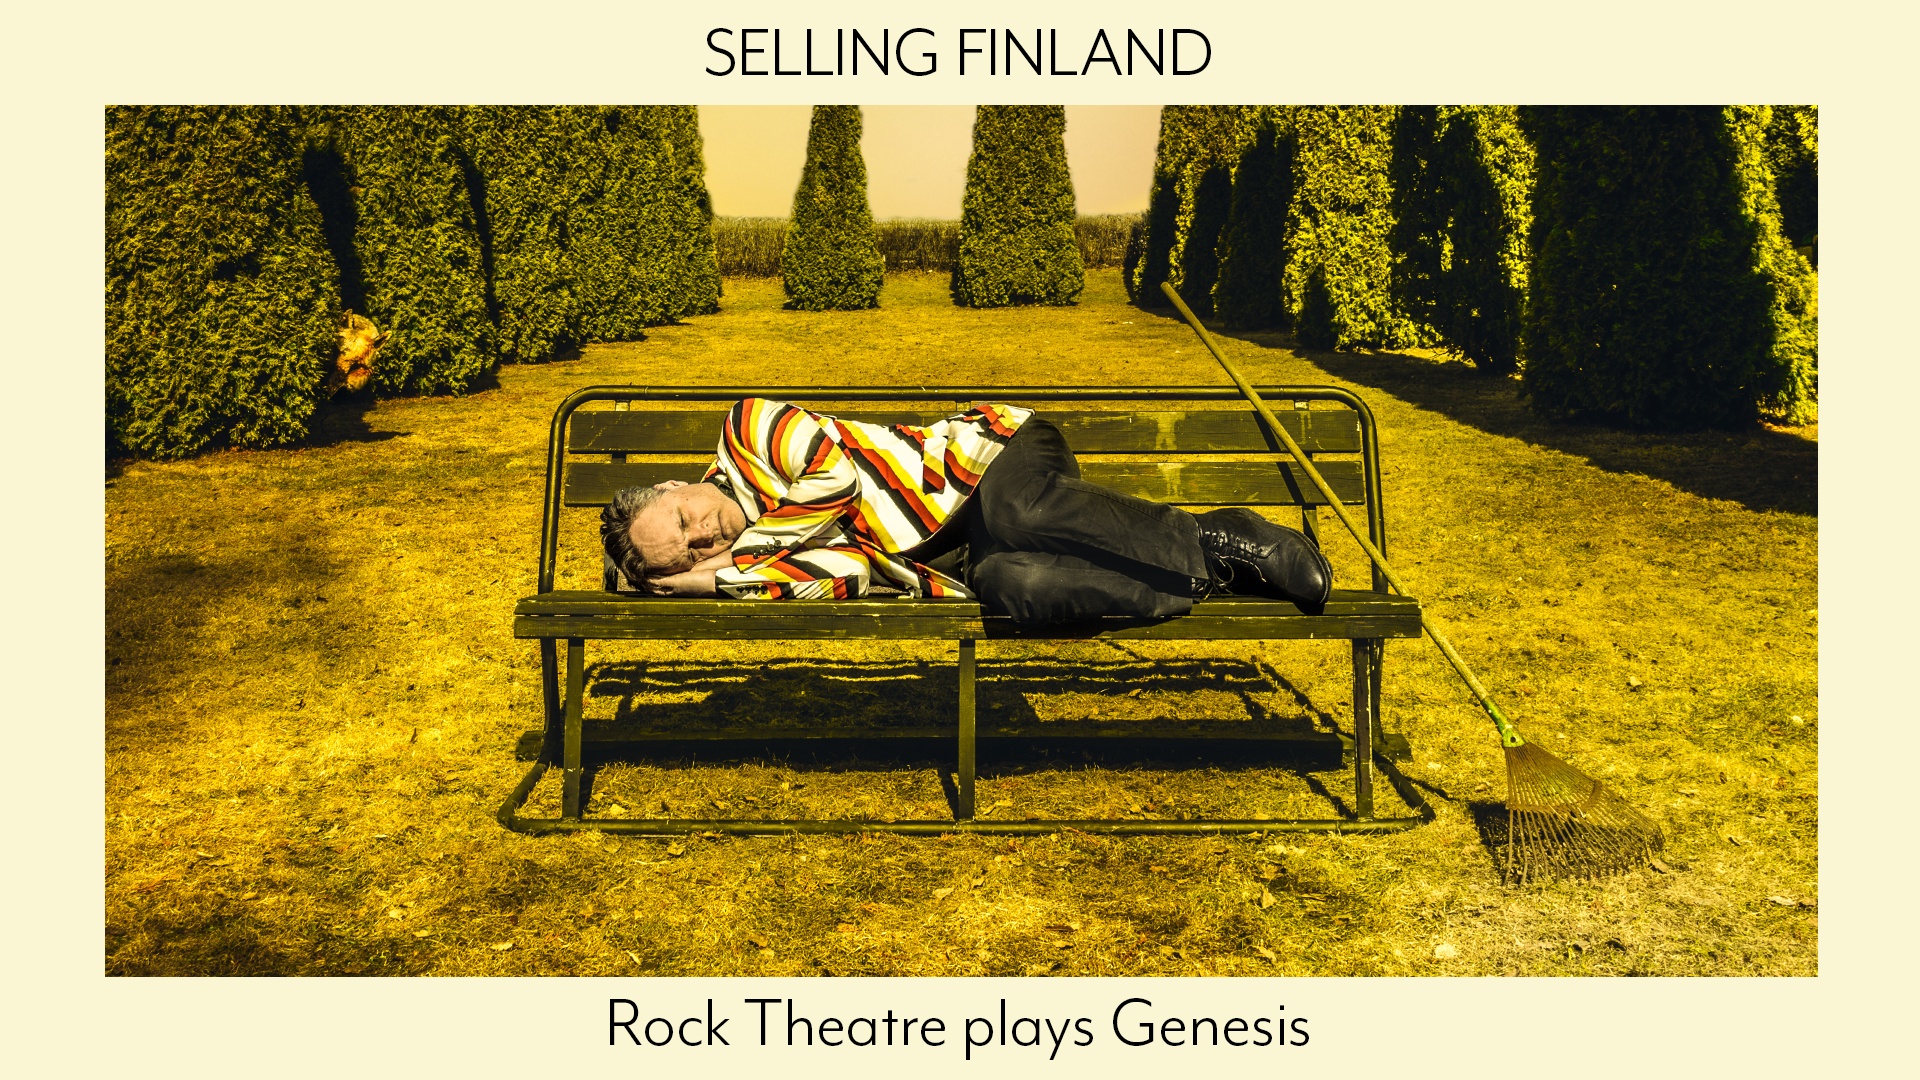 SELLING FINLAND